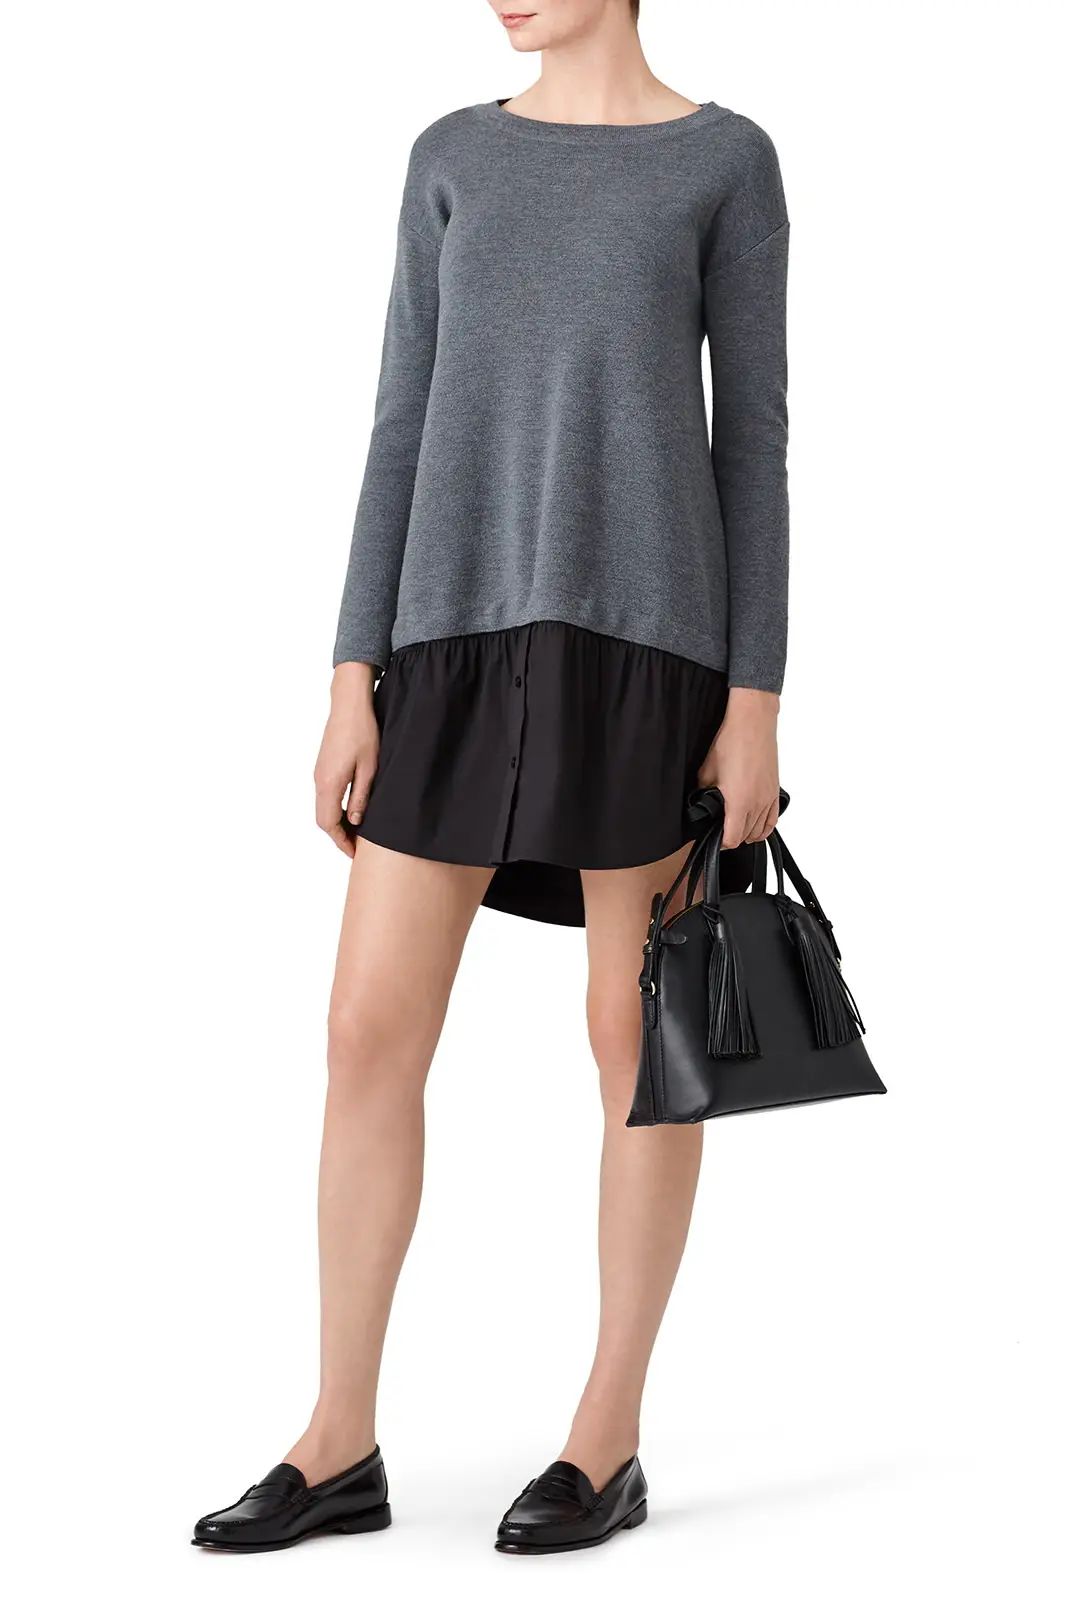 Milly Two For Sweater Dress | Rent The Runway